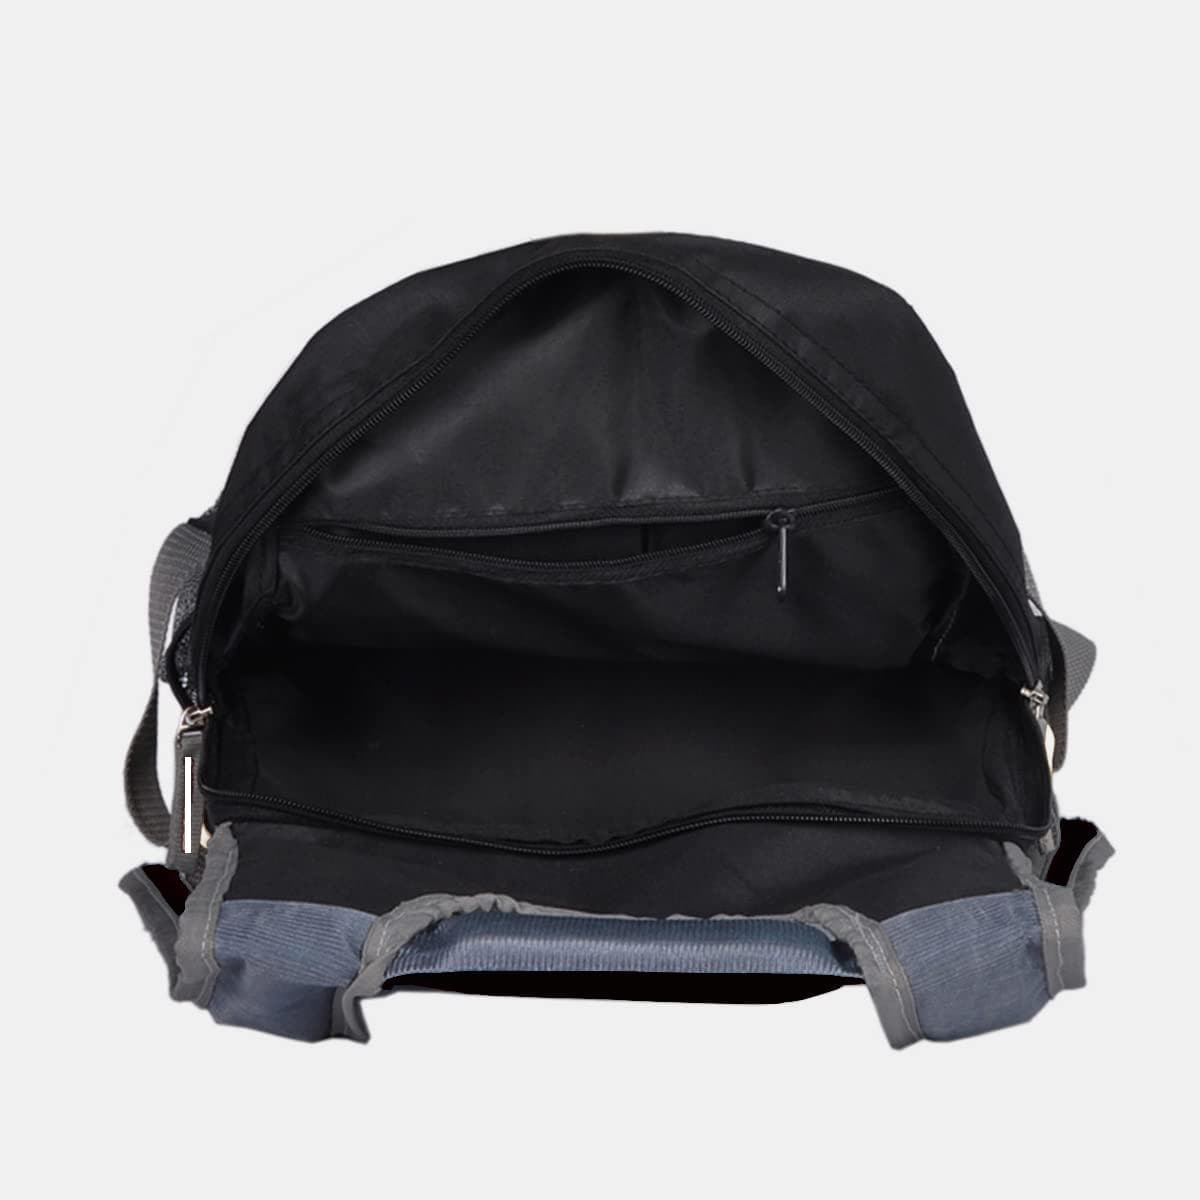 Right choice small 20 l backpack make yours self (black) - halfpeapp